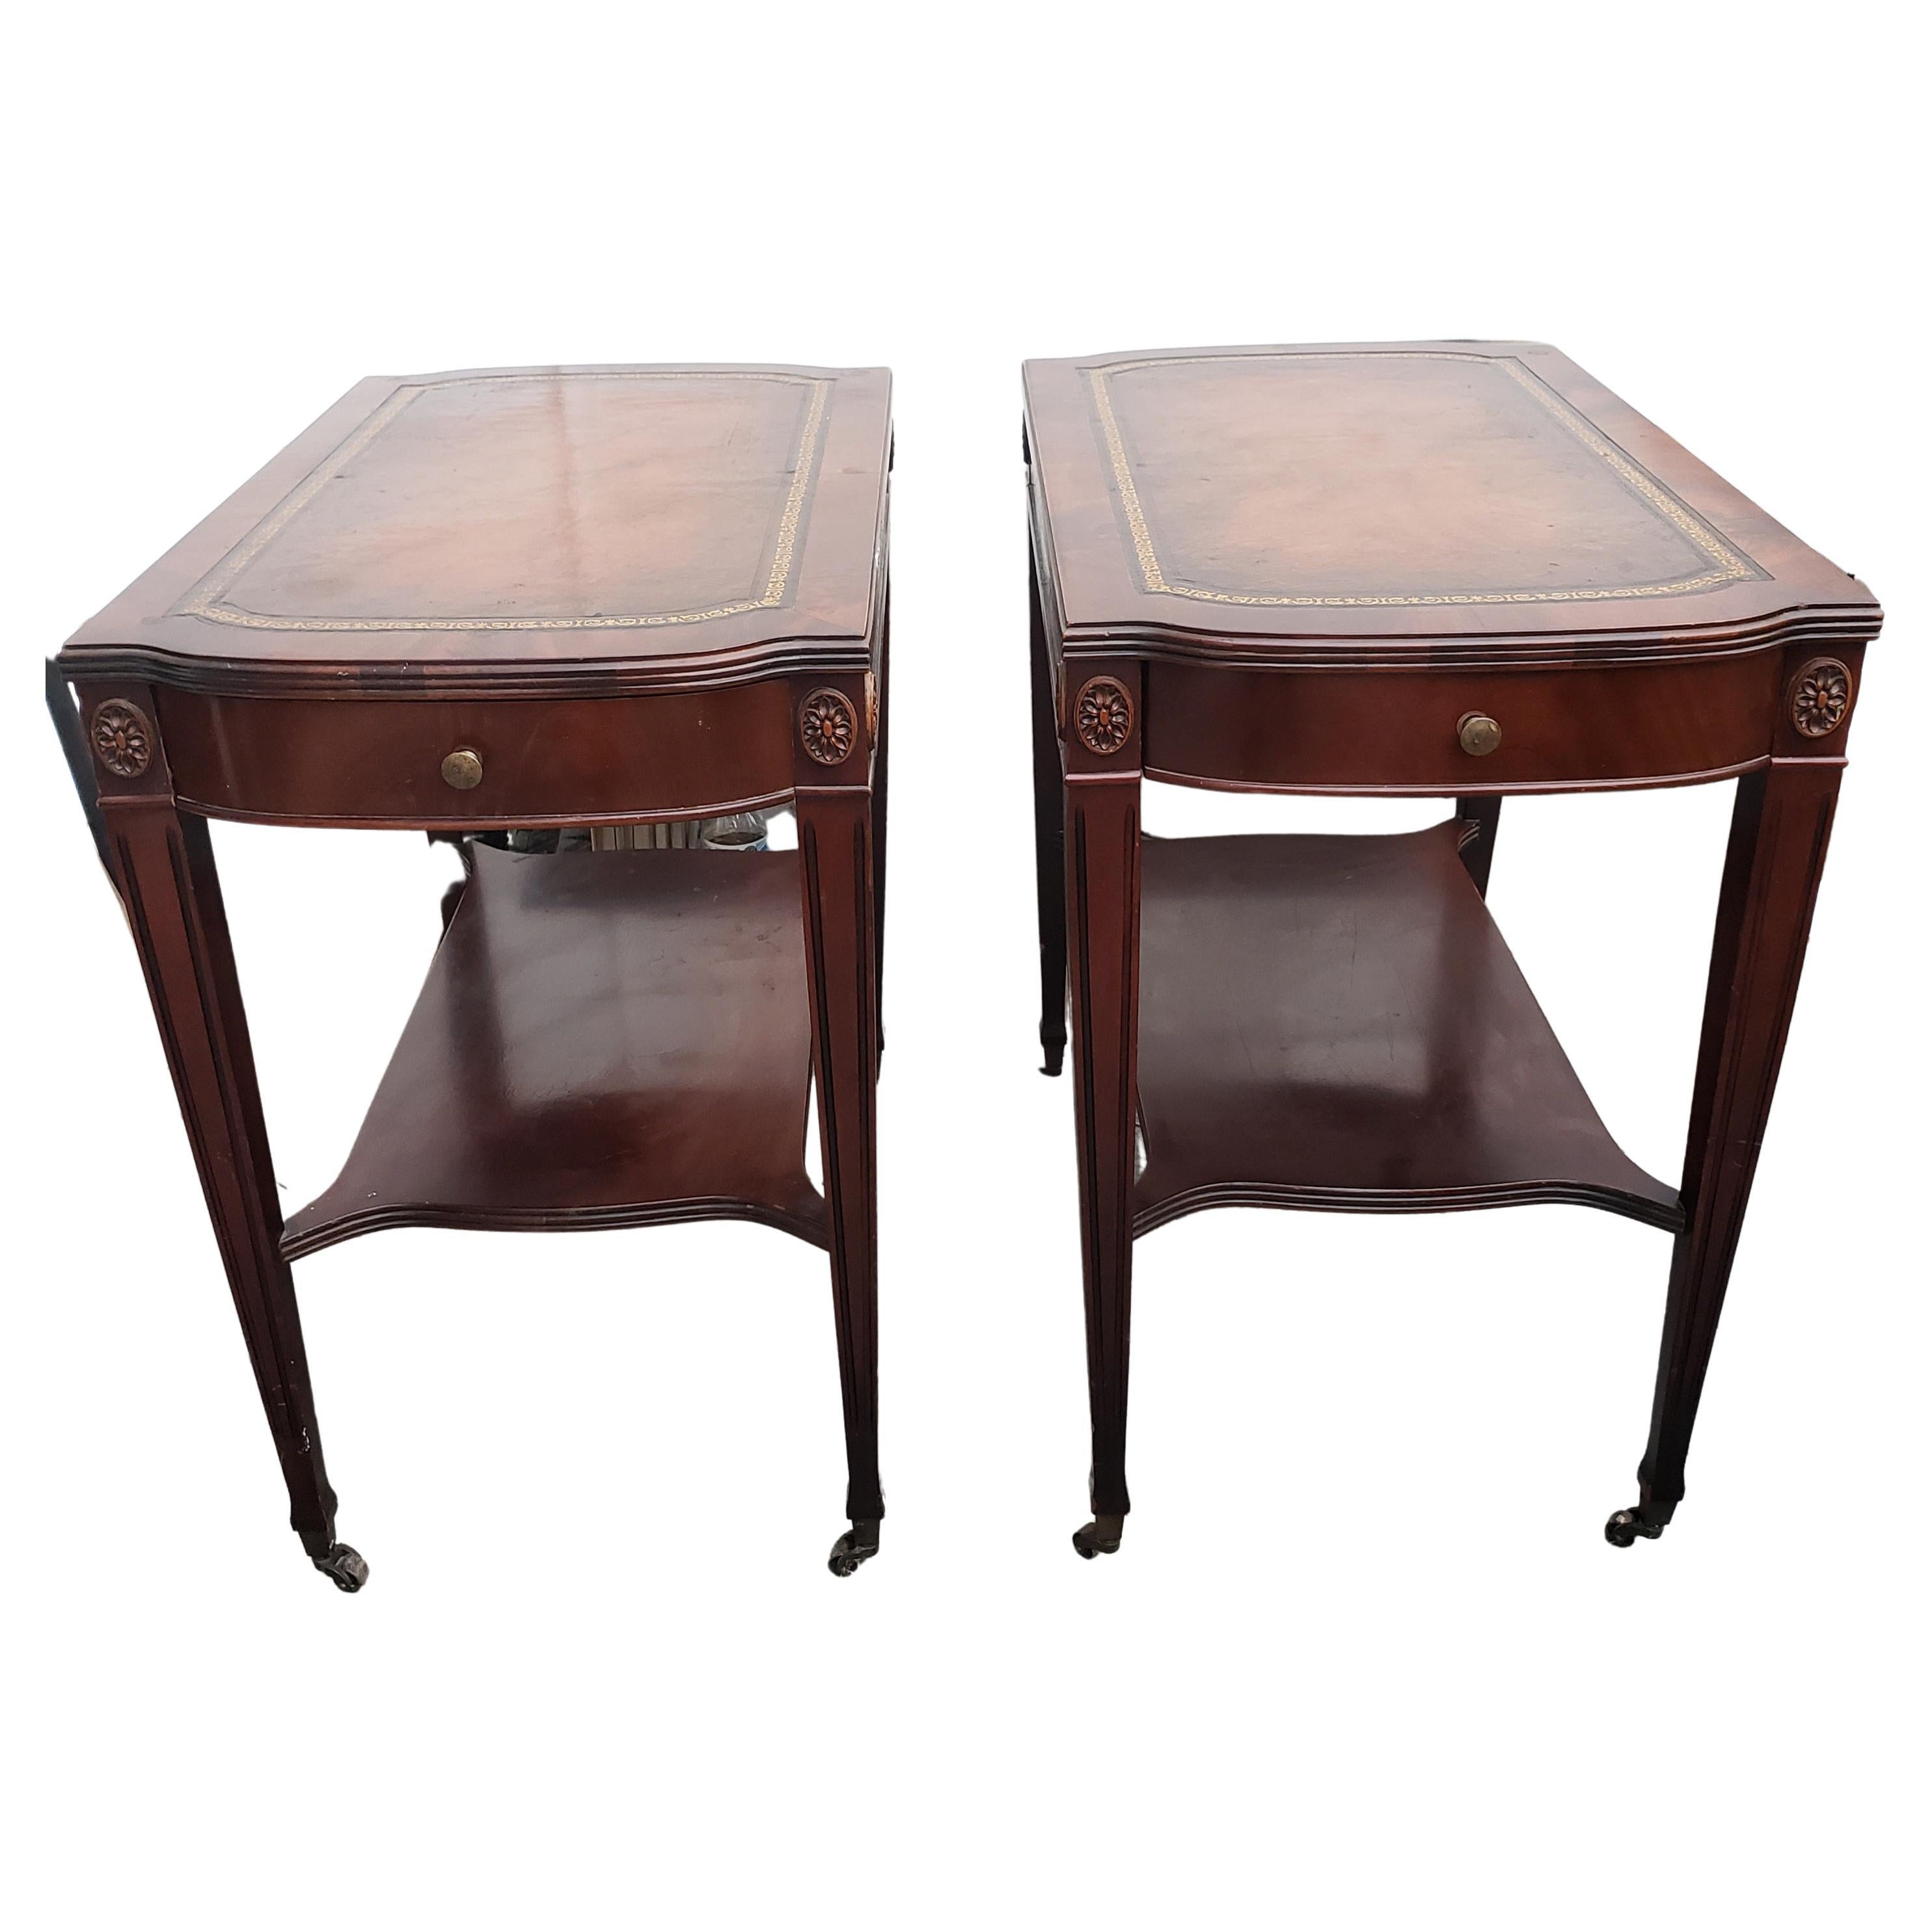 Marvelous pair of mahogany wood tables from the 1930s by Weiman. Very well maintained. They measure 25